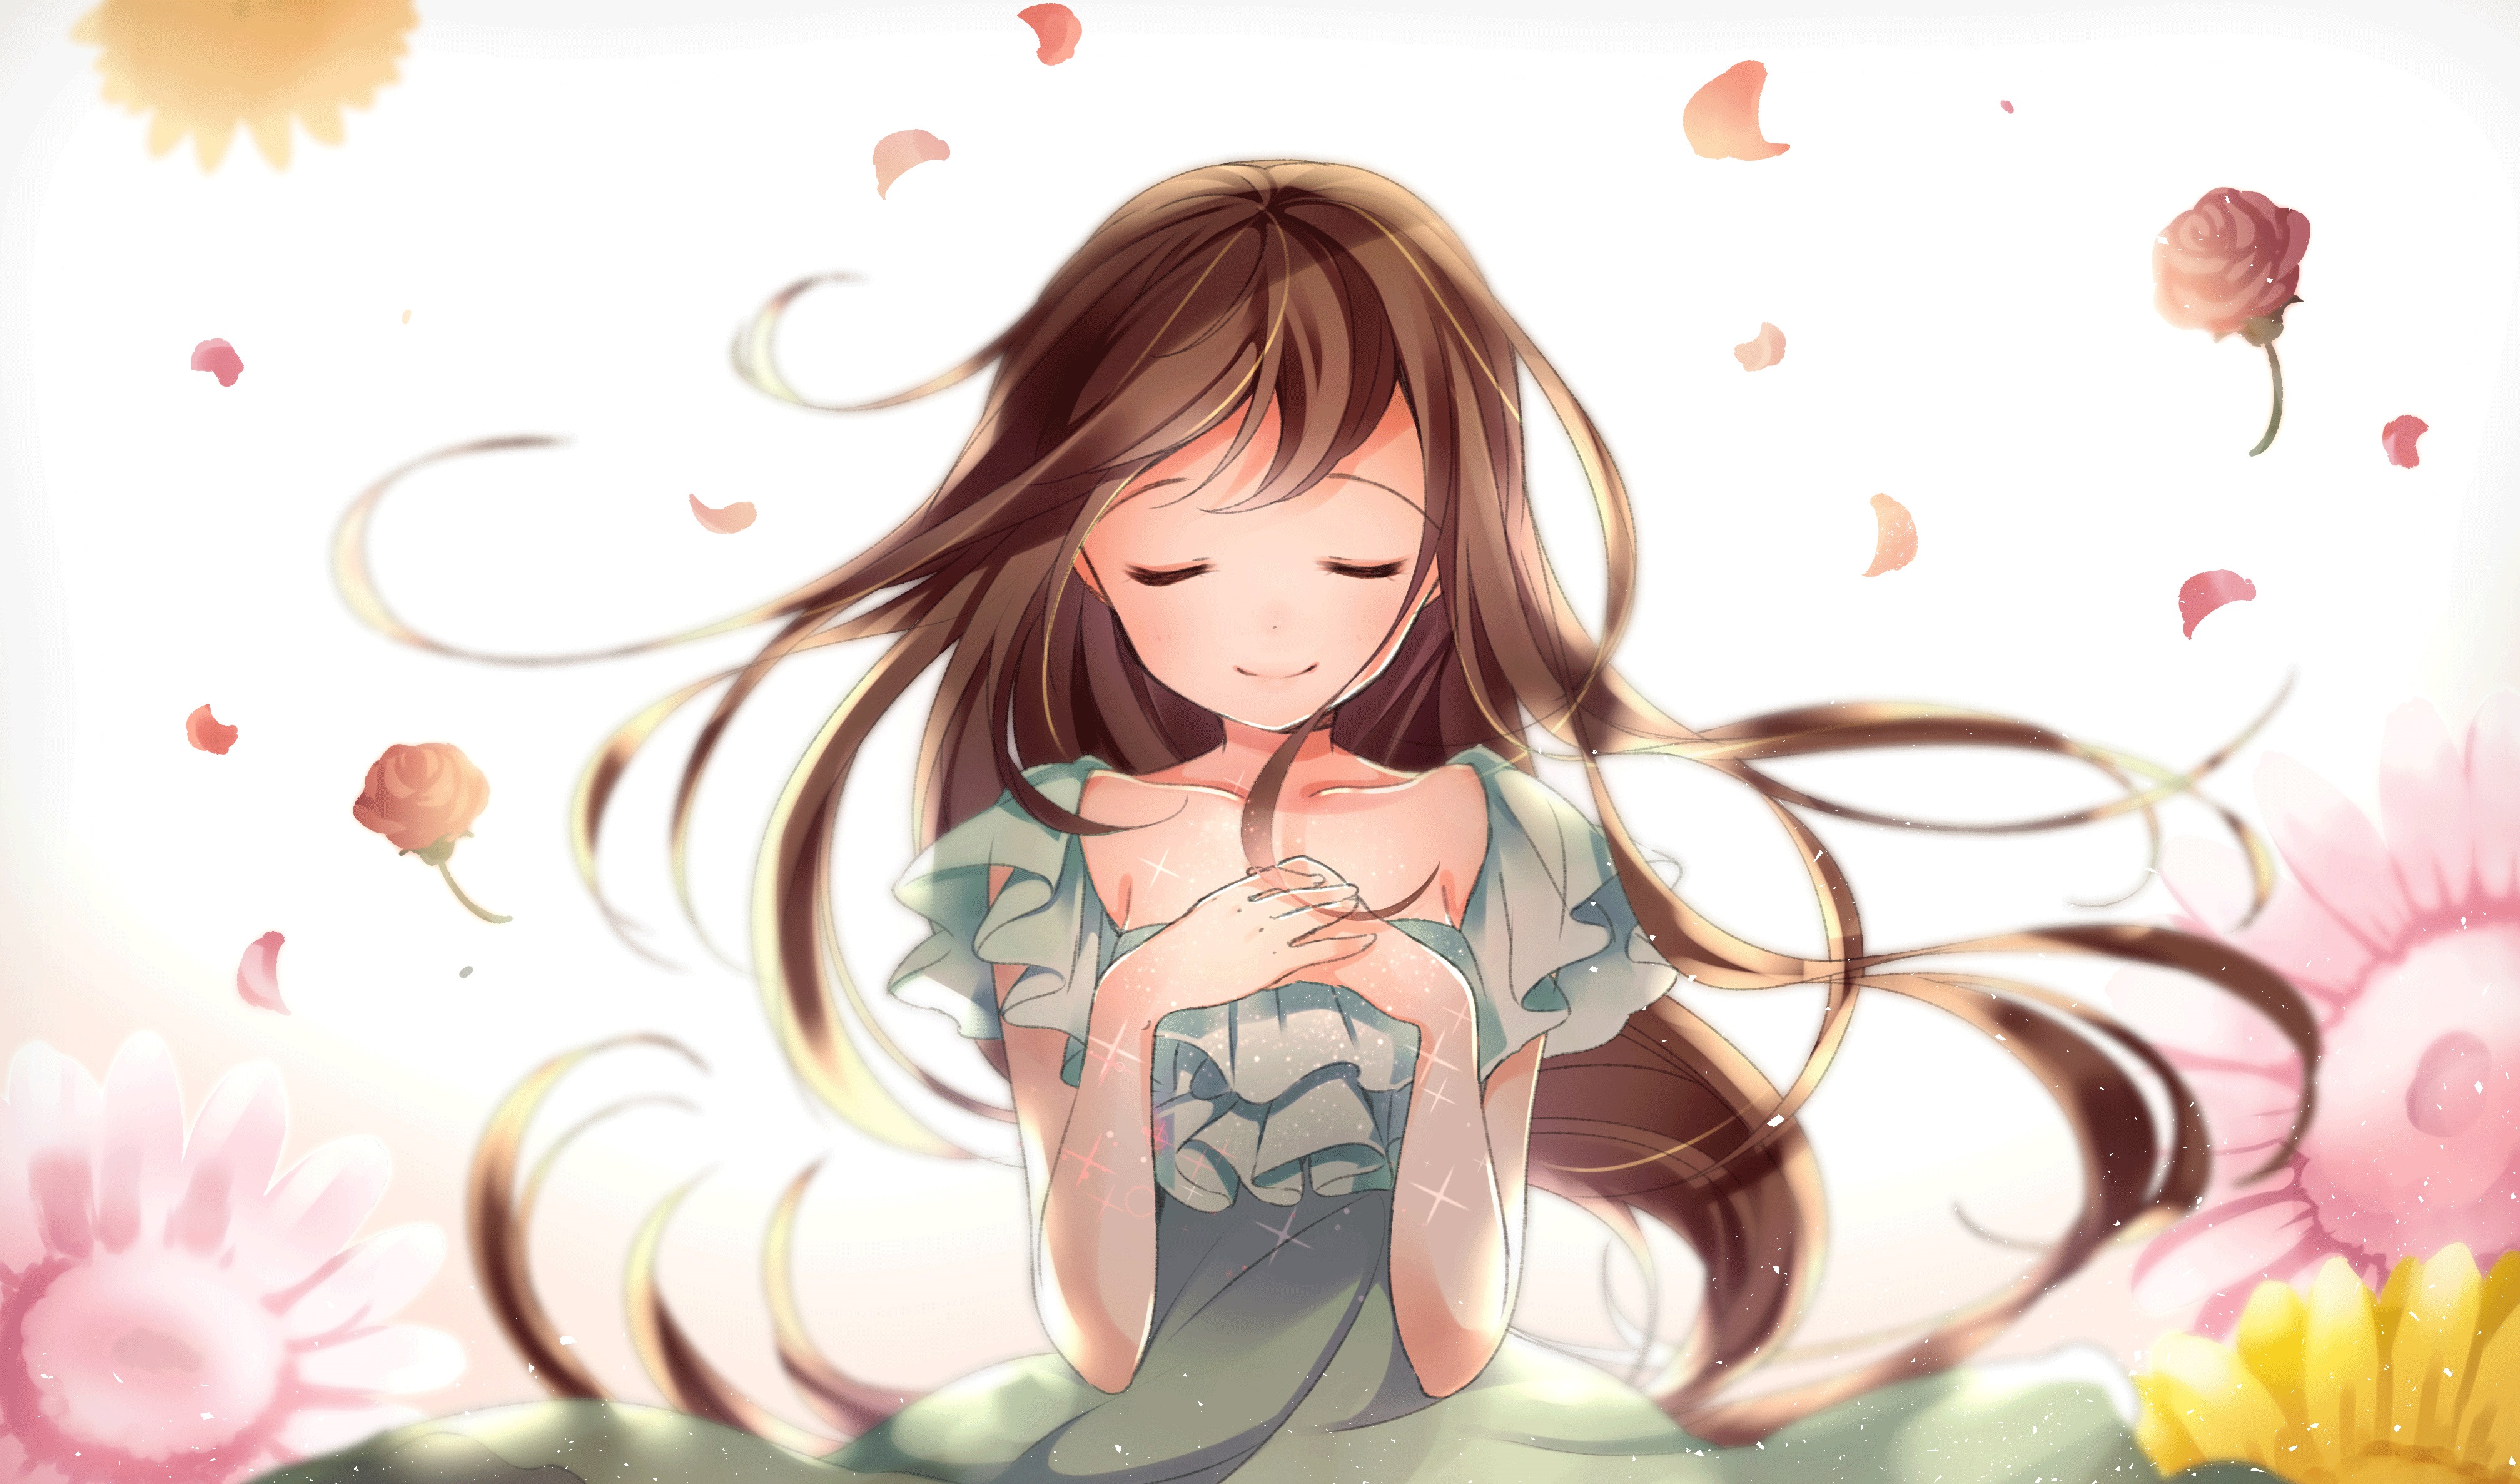 Beautiful anime girl with closed eyes Desktop wallpapers 1920x1080